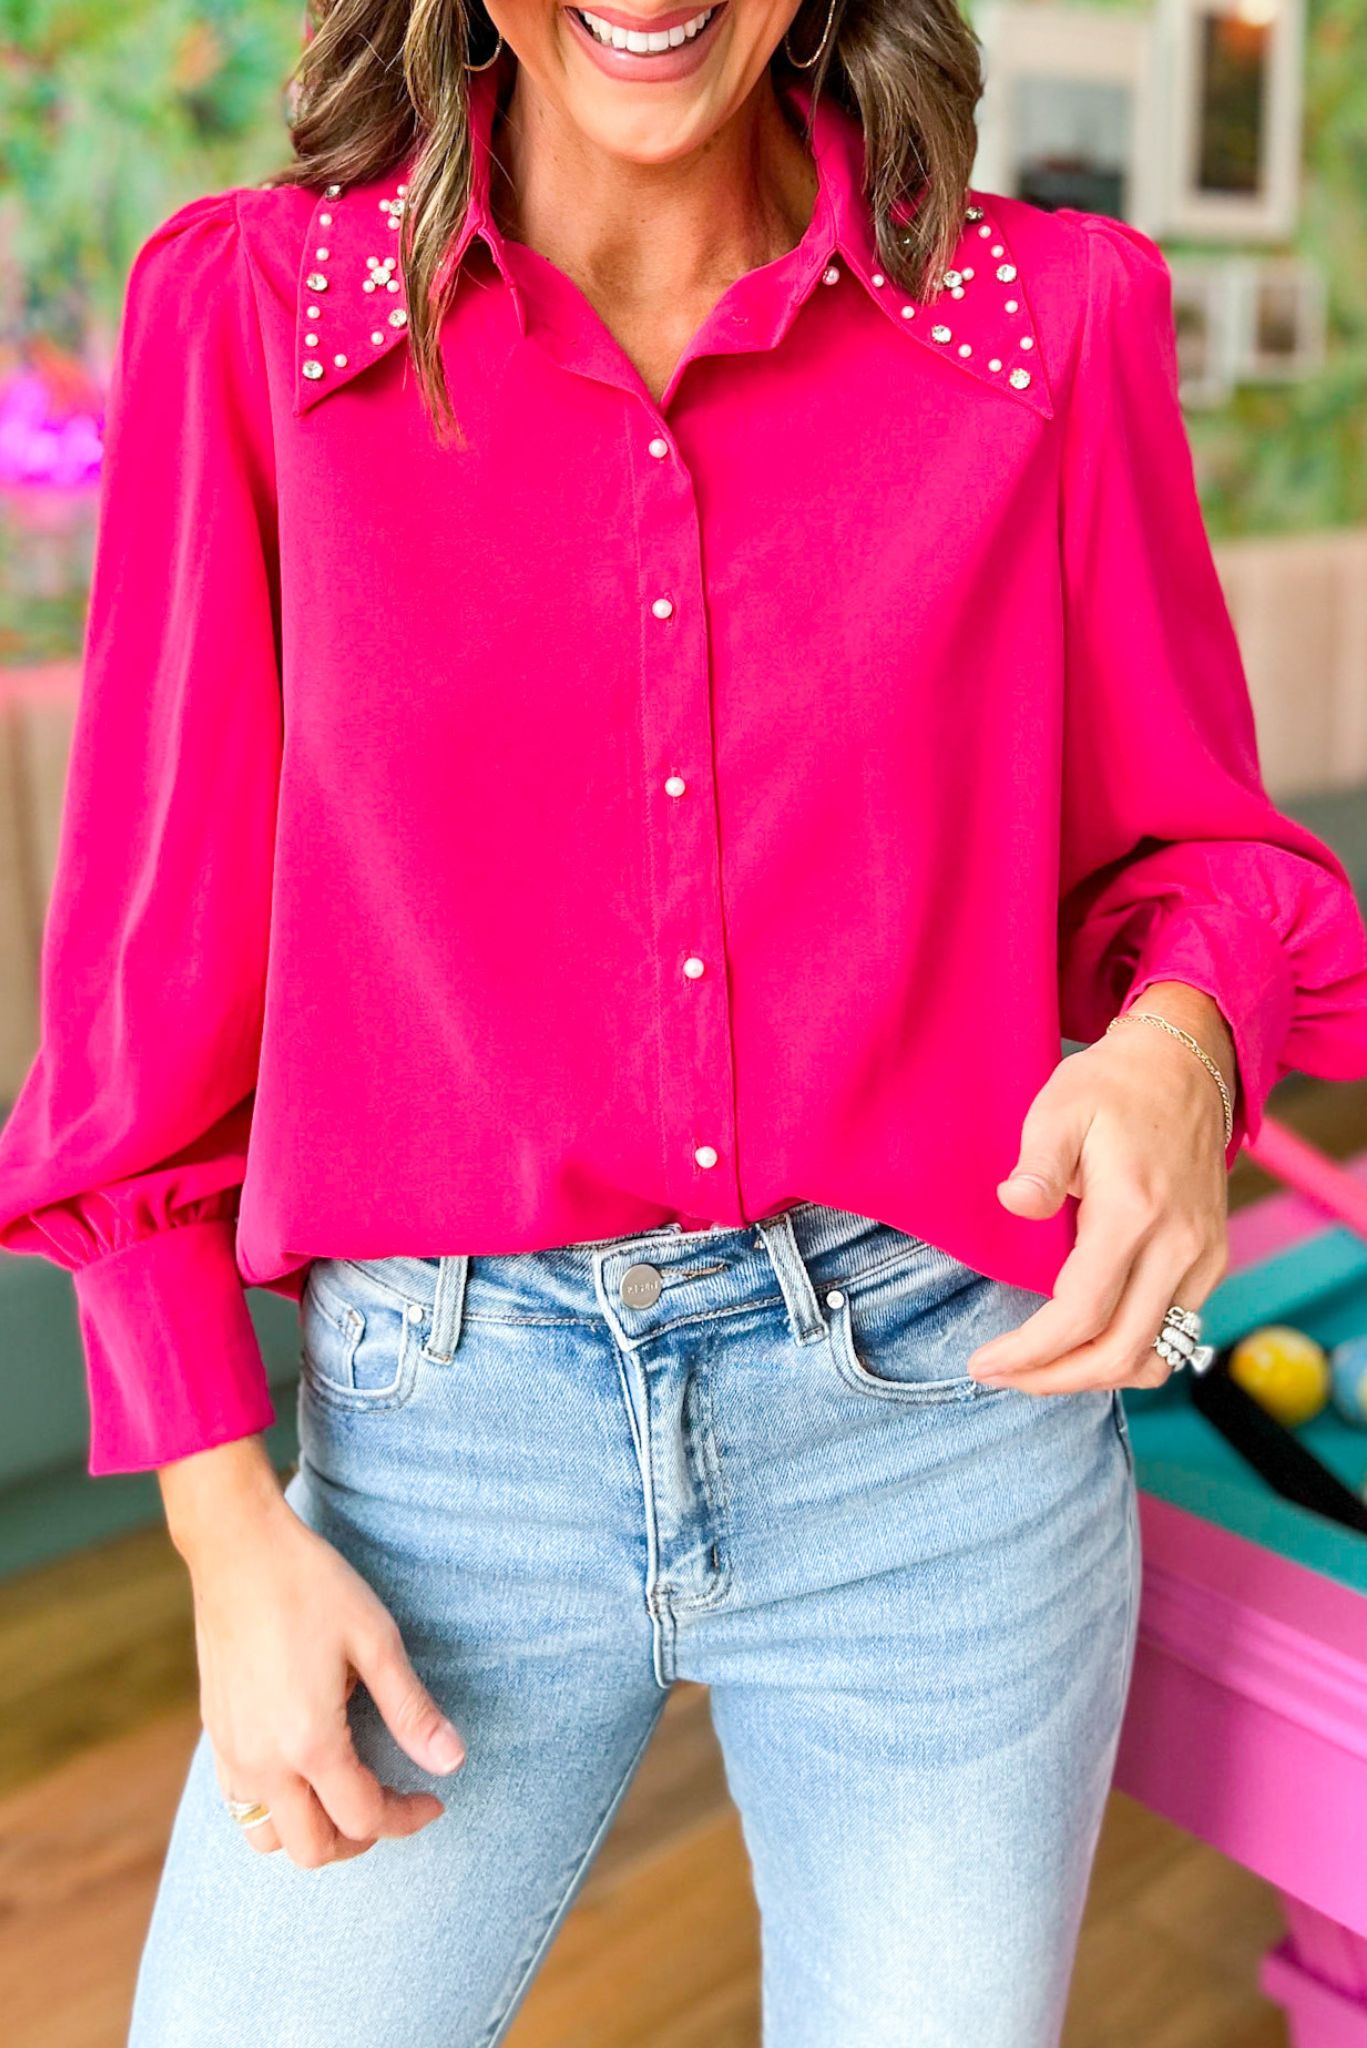 Load image into Gallery viewer, Fuchsia Pearl Rhinestone Embellished Button Down Top, must have, pearl rhinestone detail, mom style, holiday look, glam, chic, shop style your senses by mallory fitzsimmons
